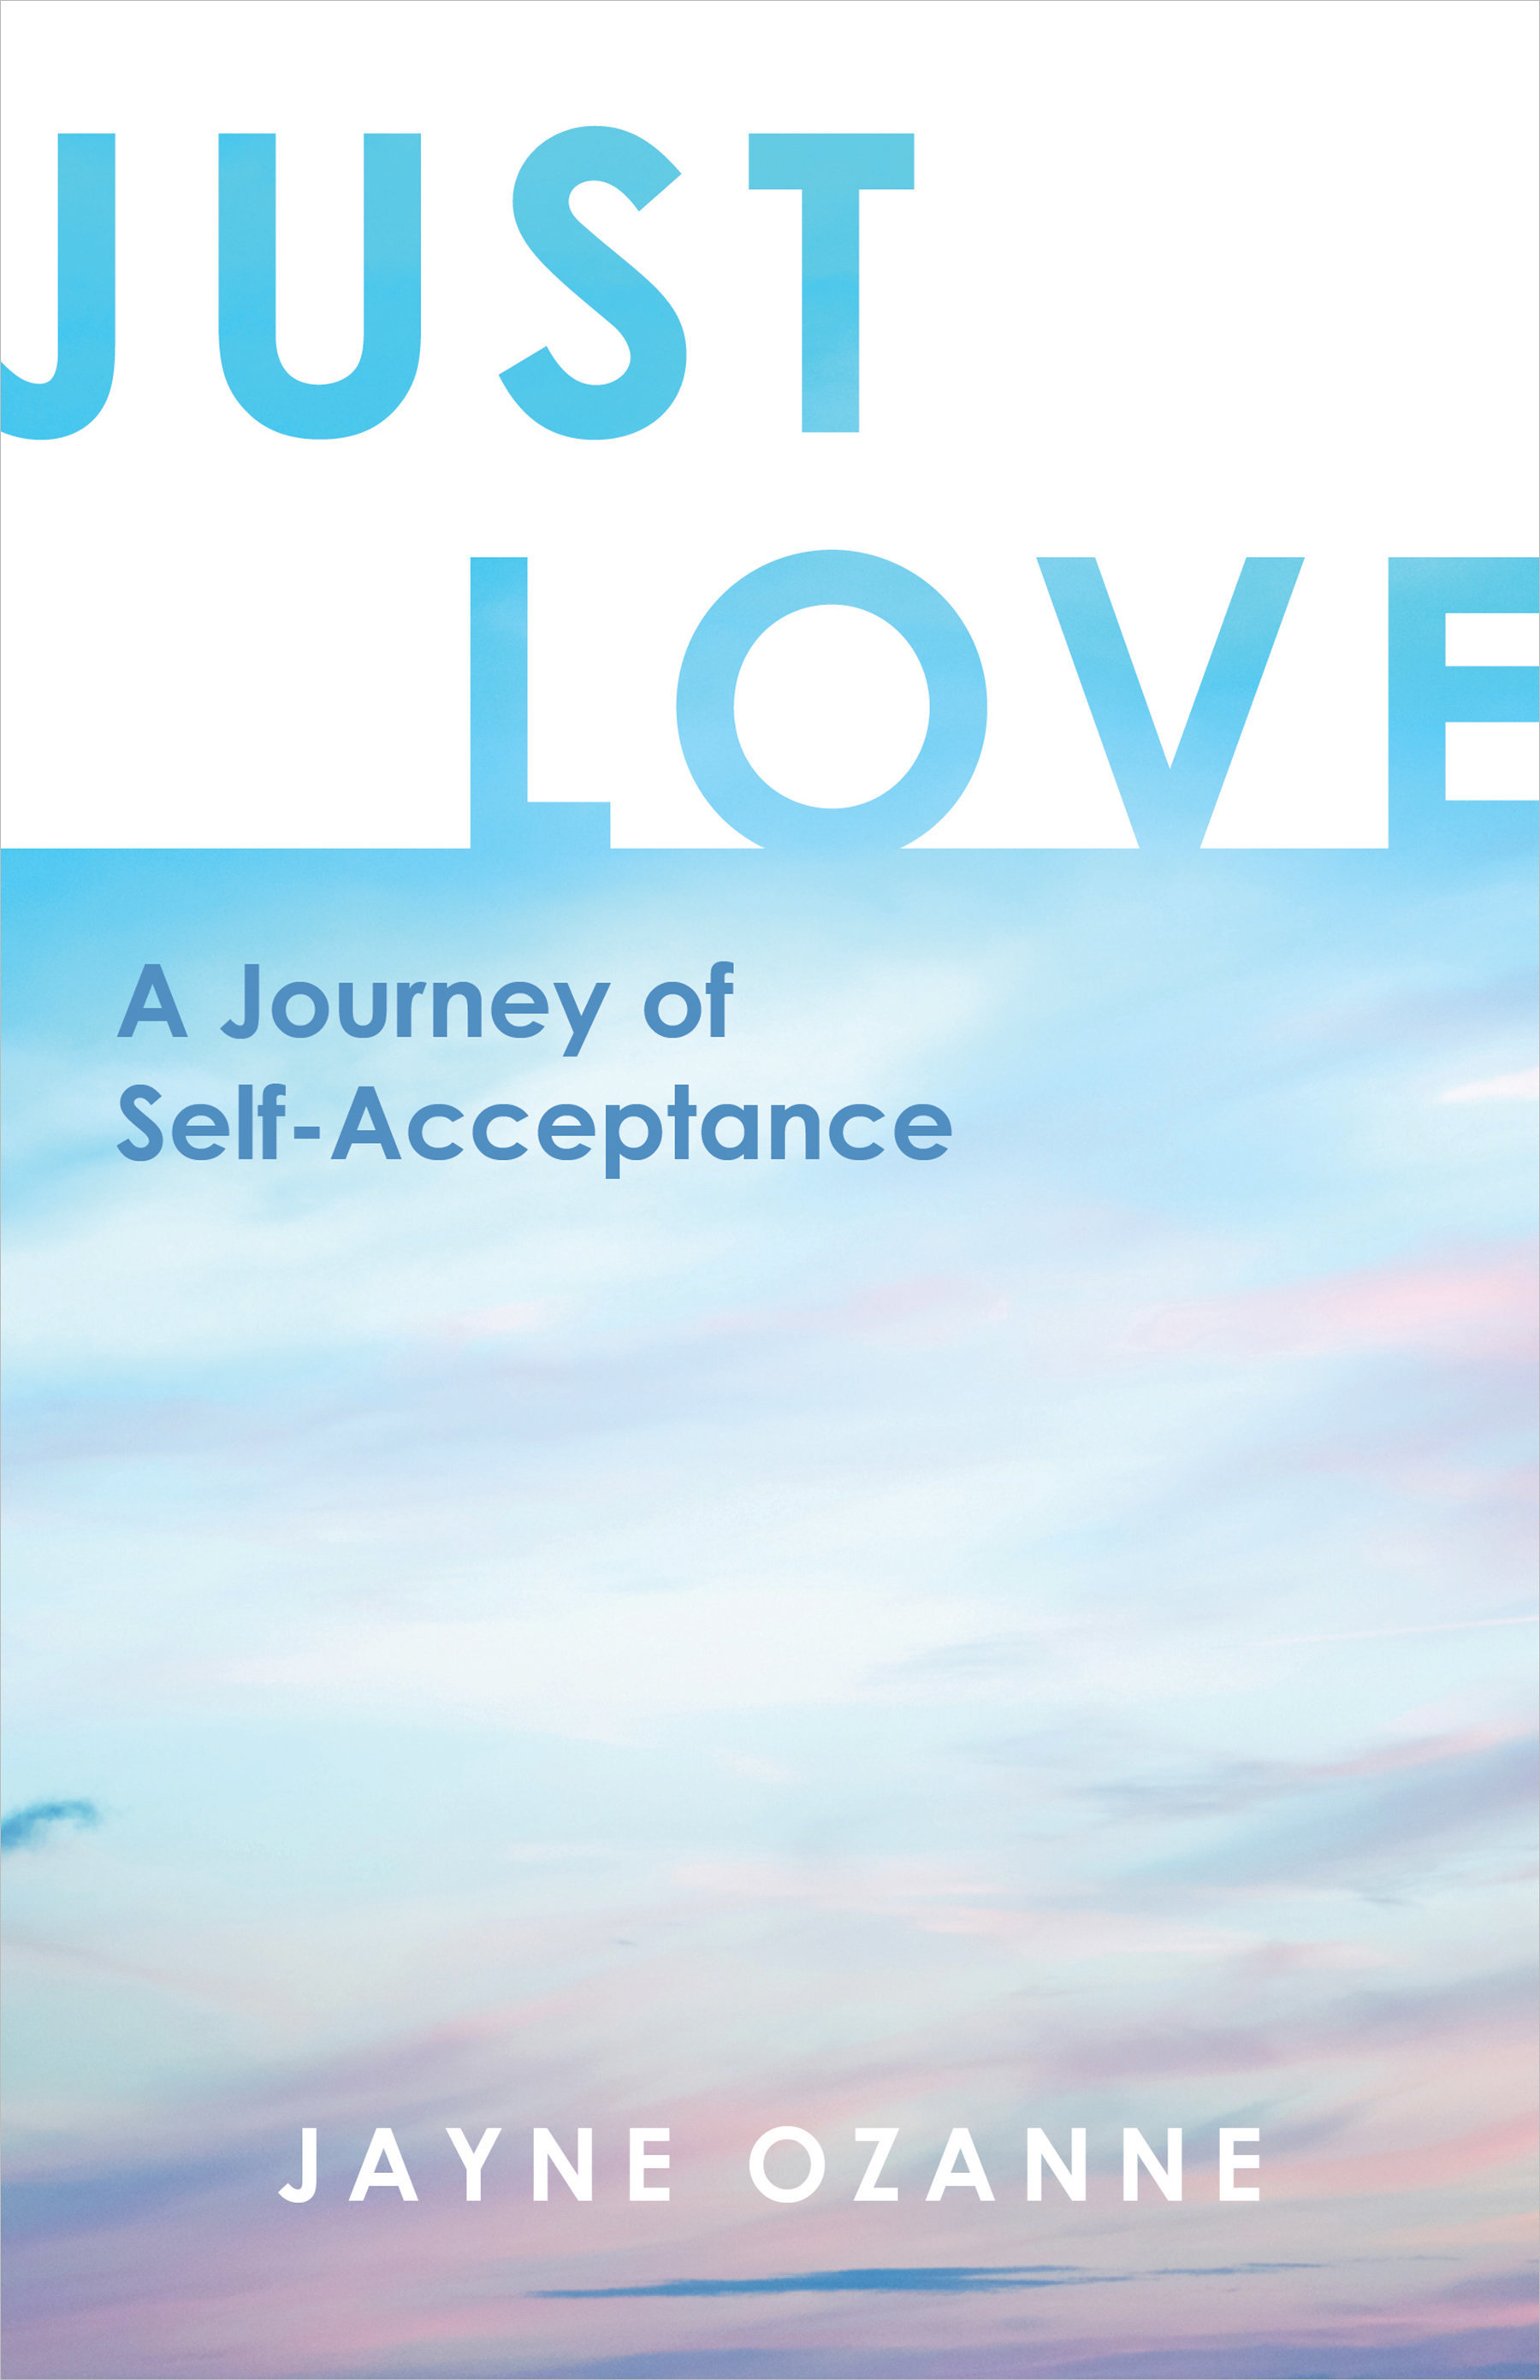 Just Love: A Journey of Self-Acceptance